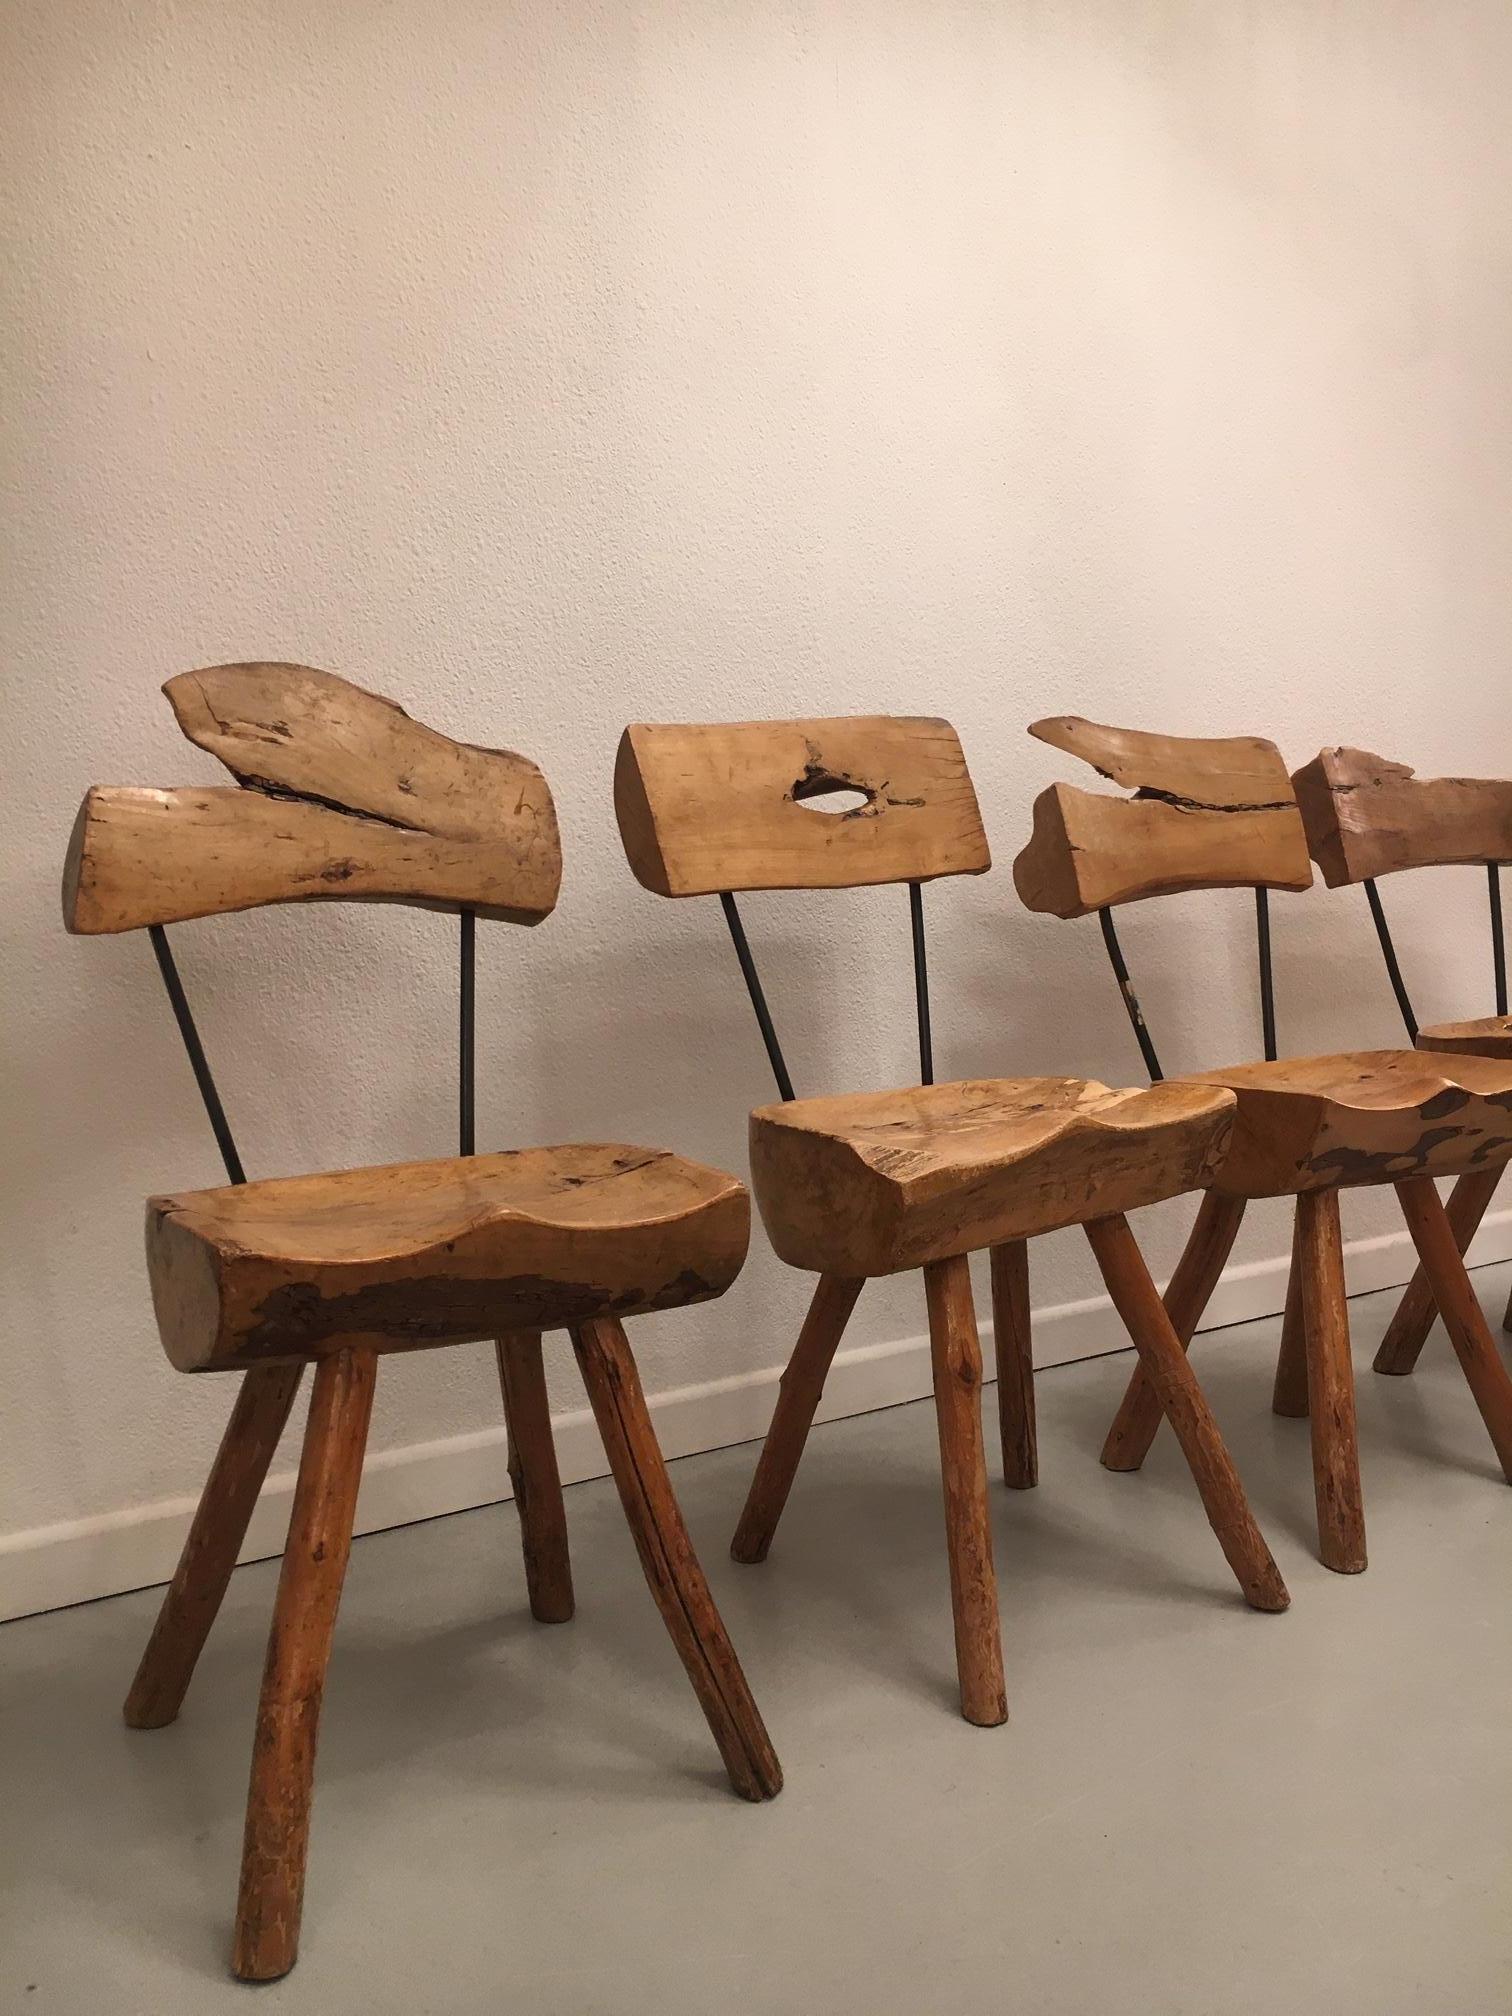 French Set of 5 Solid Olive Wood Brutalist Rustic Dining Chairs, circa 1950s For Sale